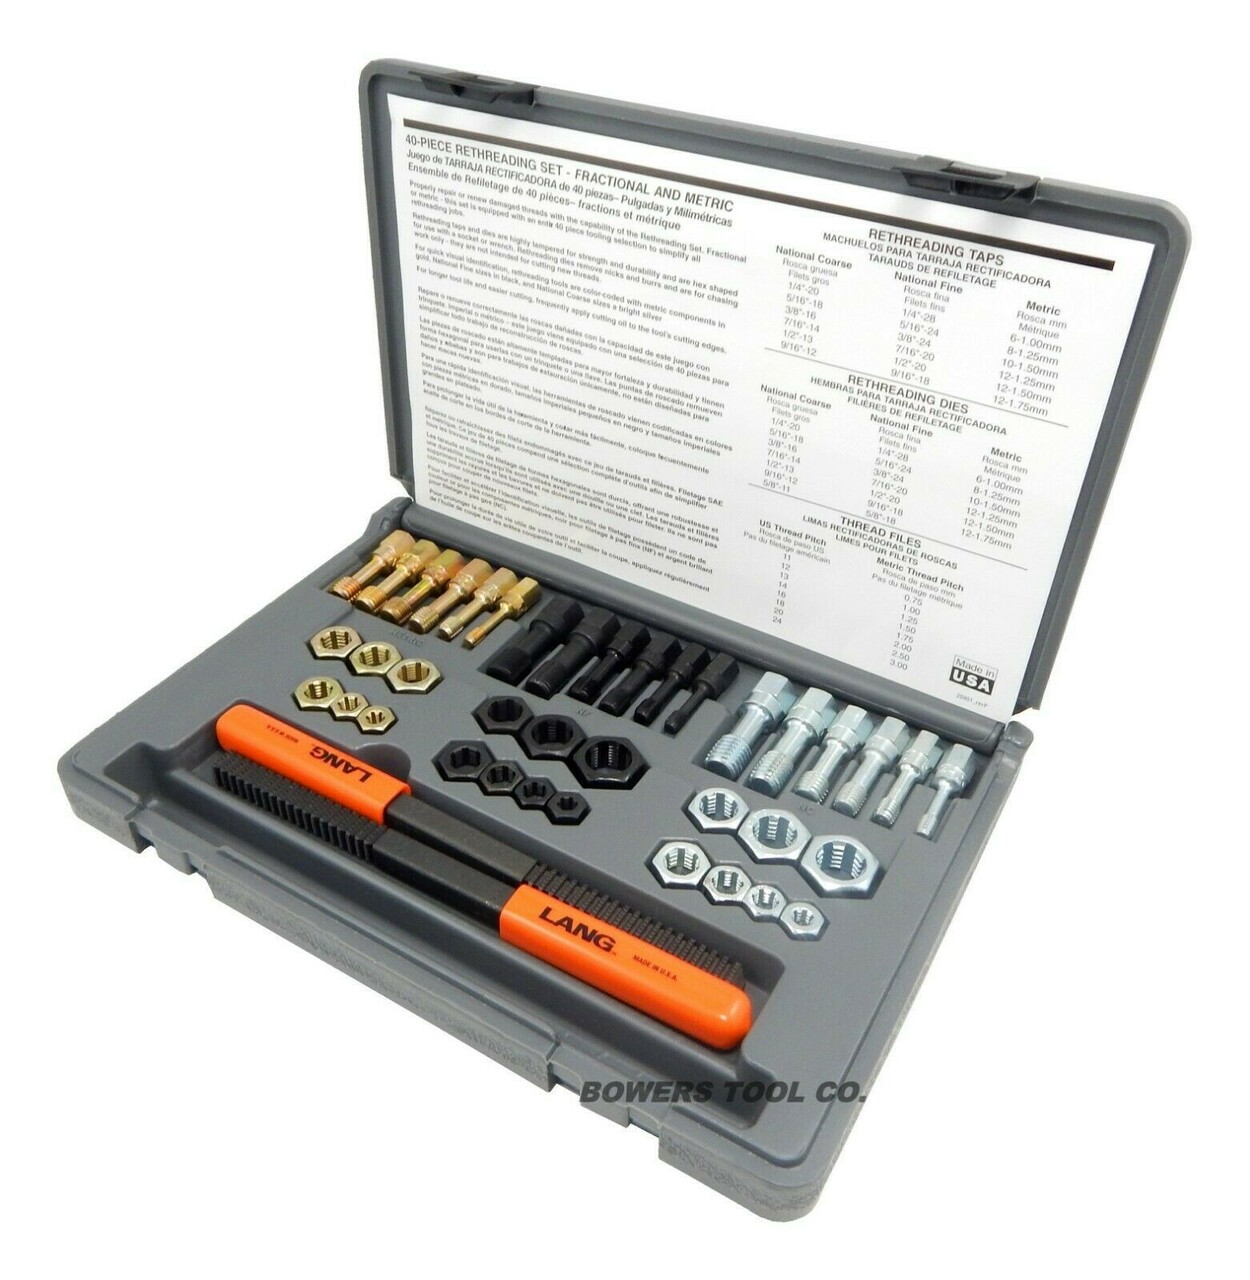 Lang Tools 2581 26-Piece Thread Restorer Tap and Die Set, black - MADE IN  USA | eBay